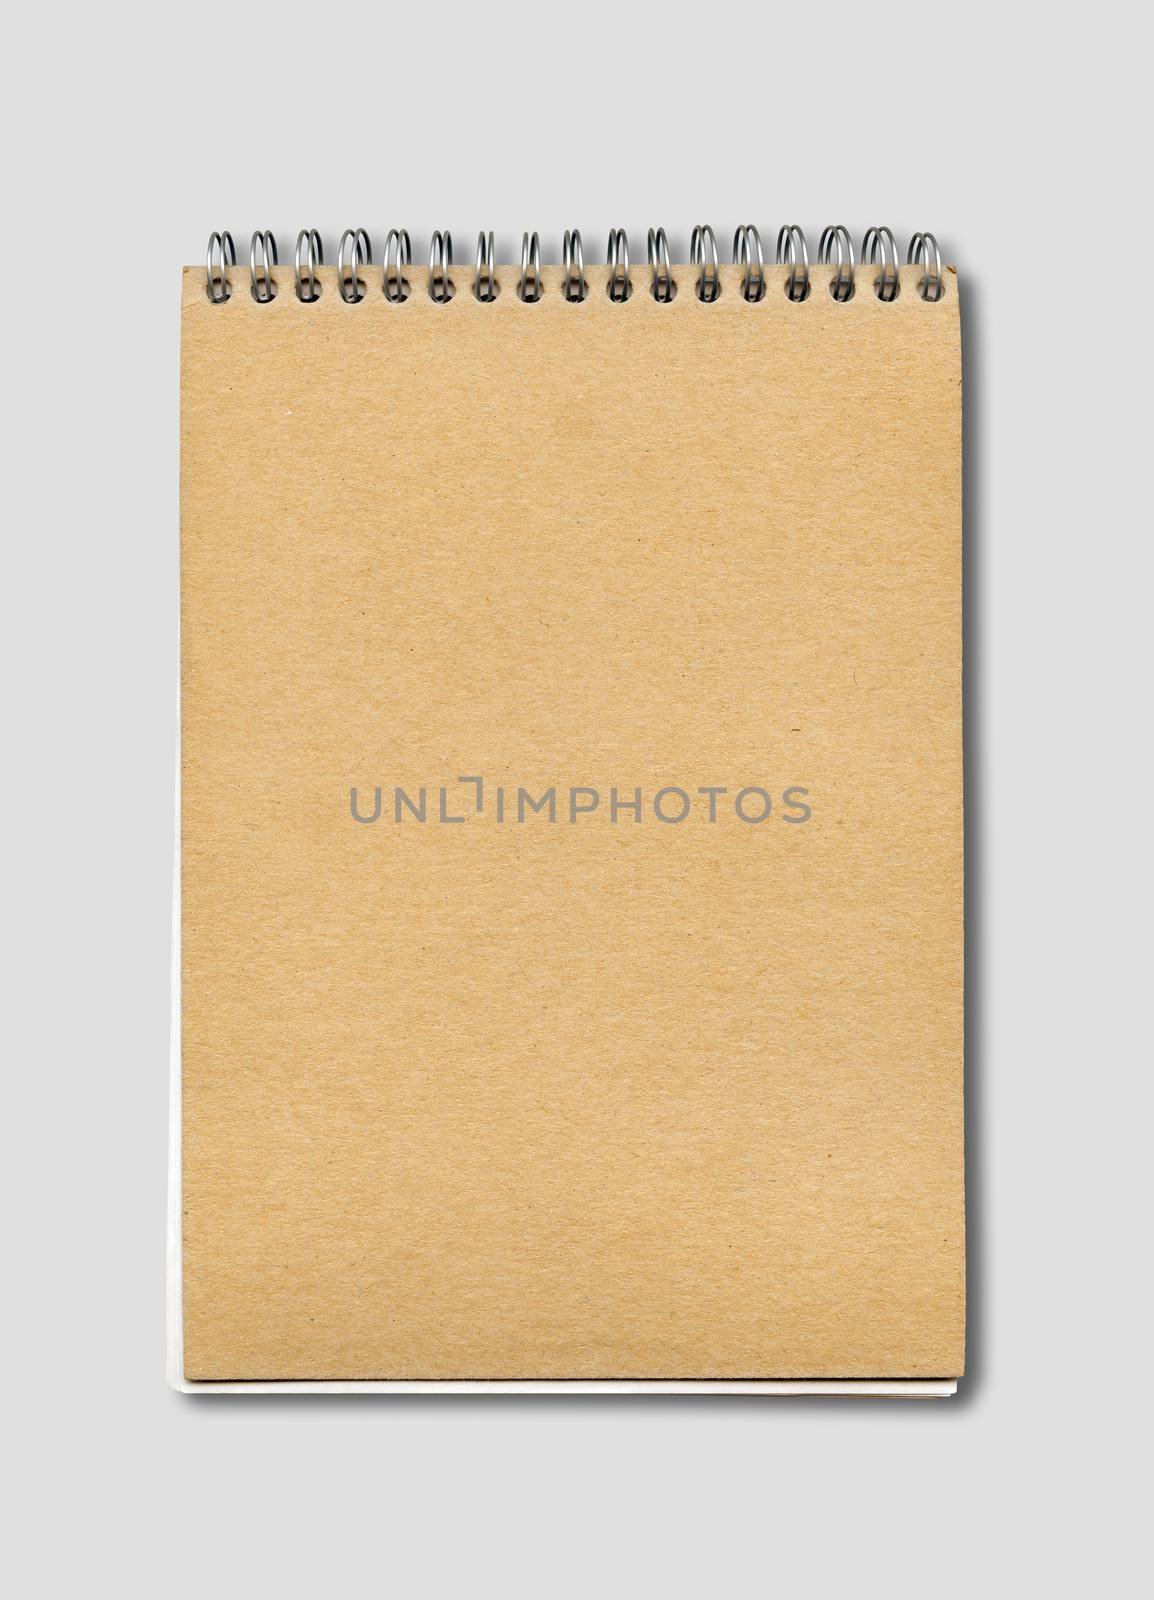 Spiral closed notebook mockup, brown paper cover, isolated on grey